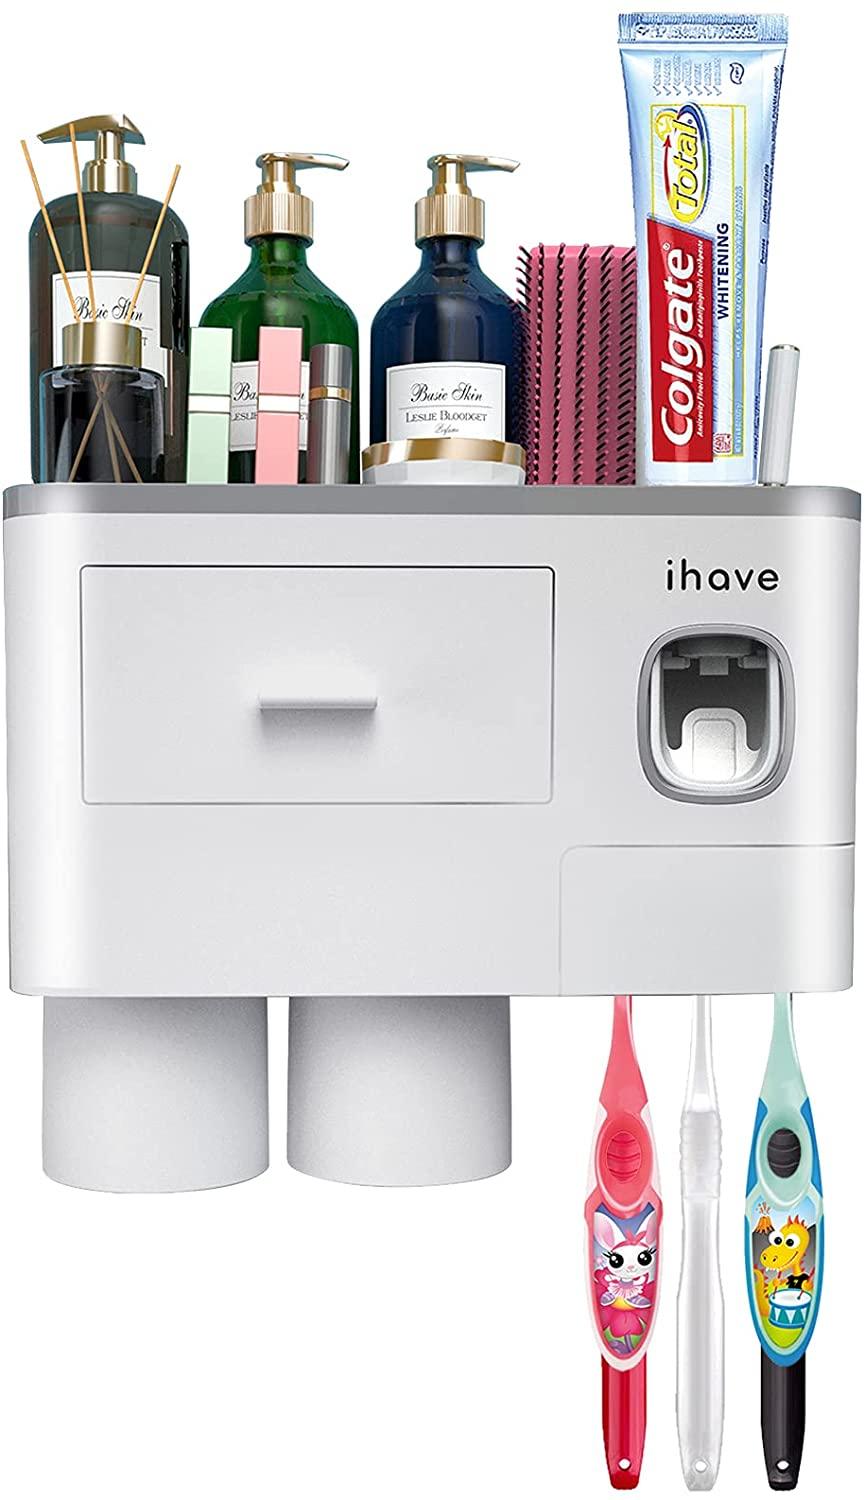 iHave Toothbrush Holders, 4 Cups Toothbrush Holder Wall Mounted with Toothpaste Dispenser, Large Capacity Tray, 2 Cosmetic Drawer and 7 Brush Slots with Cover - Etyn Online {{ product_tag }}